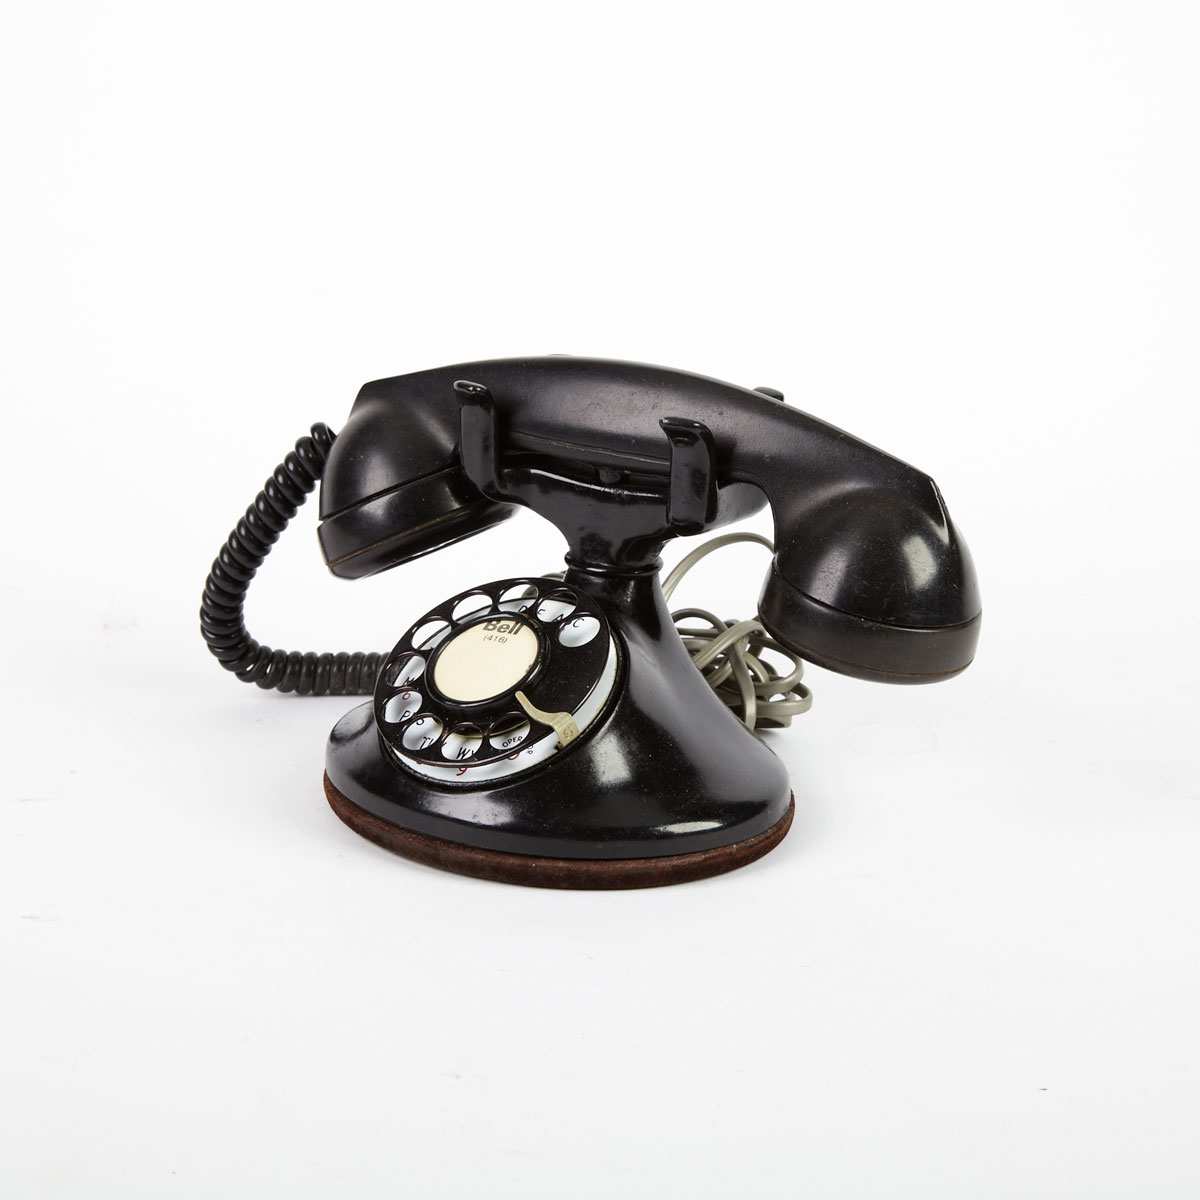 Northern Electric Rotary Dial Telephone 17a286